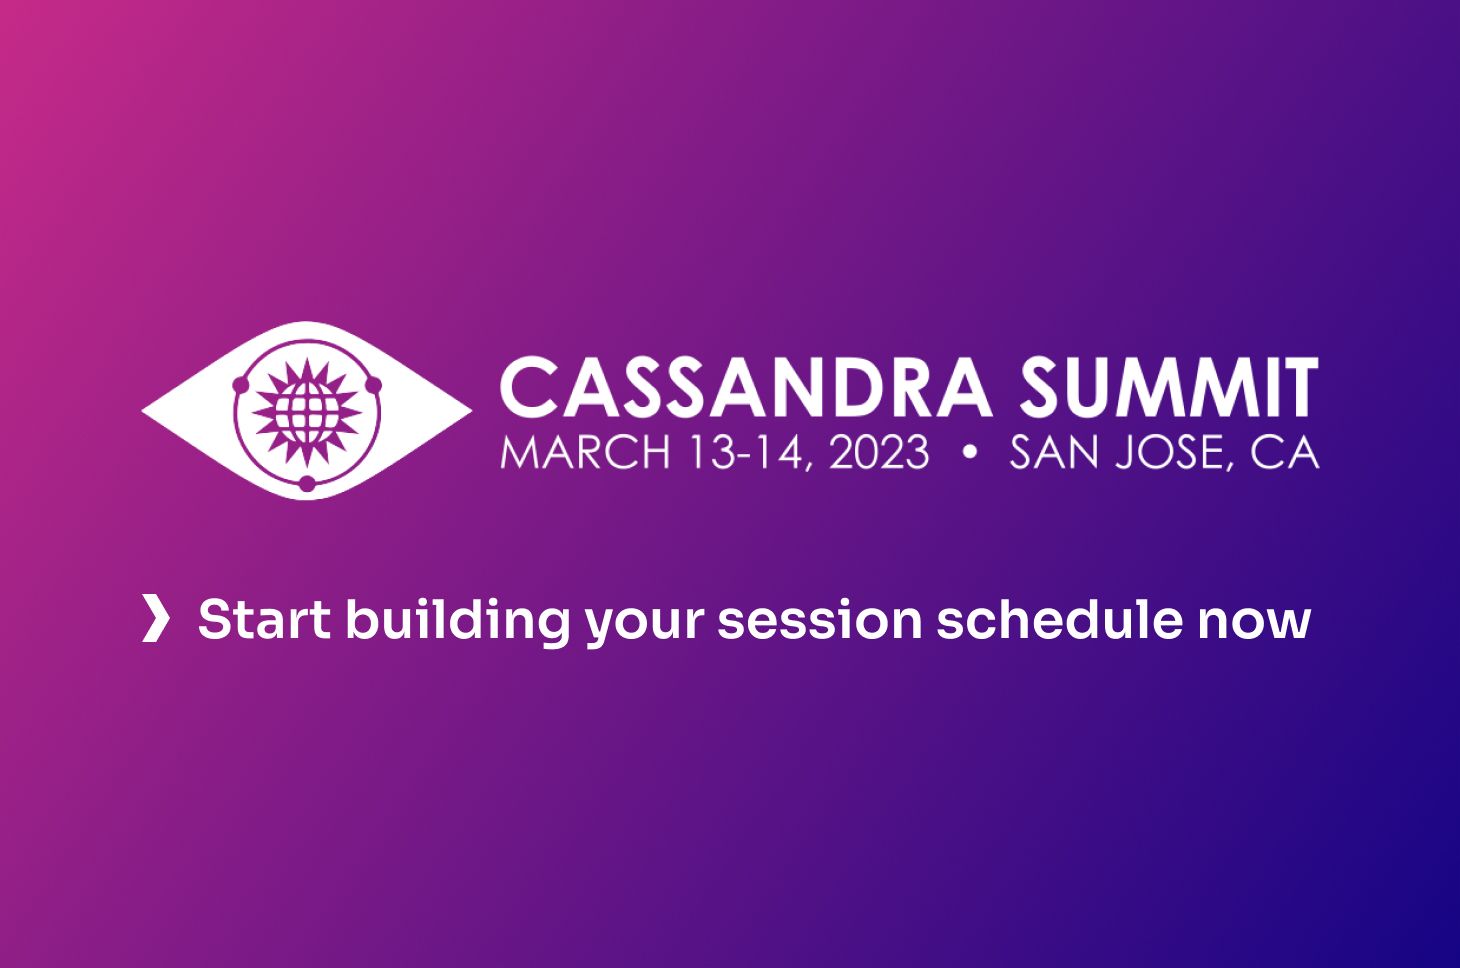 Cassandra Summit 2023 The Attendee Guide for Developers, Operators